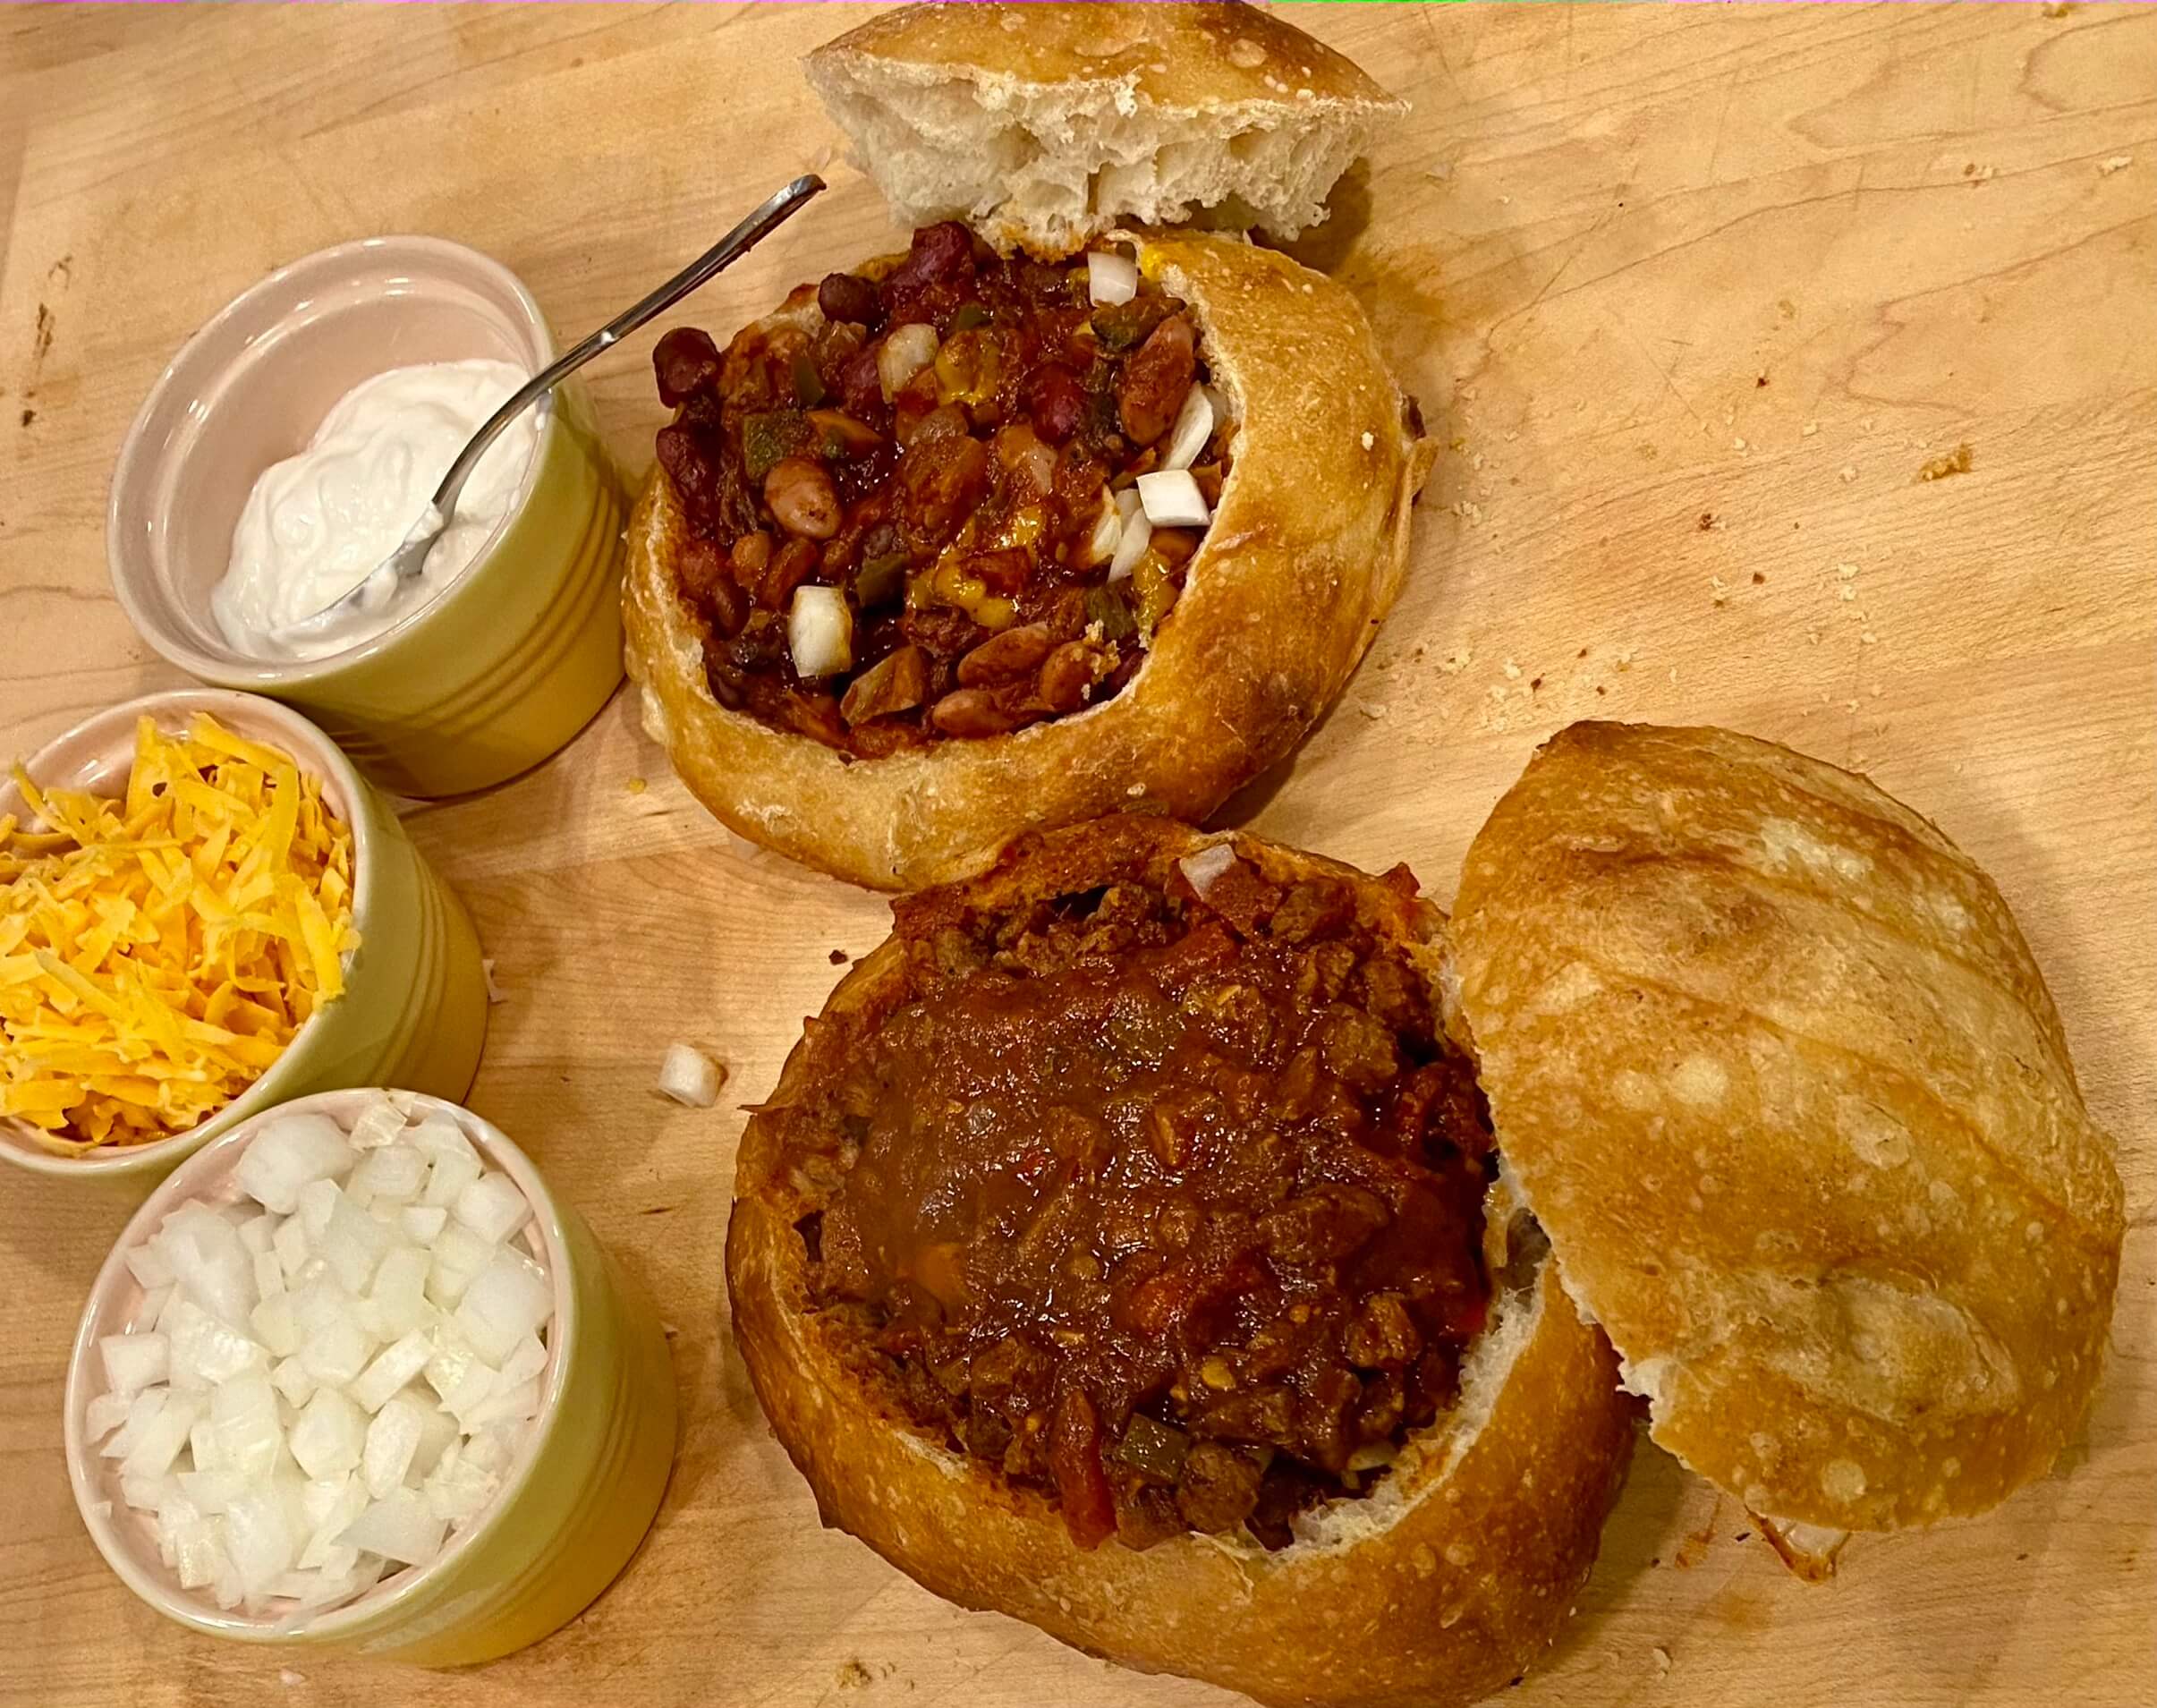 chili in bread bowls with sides